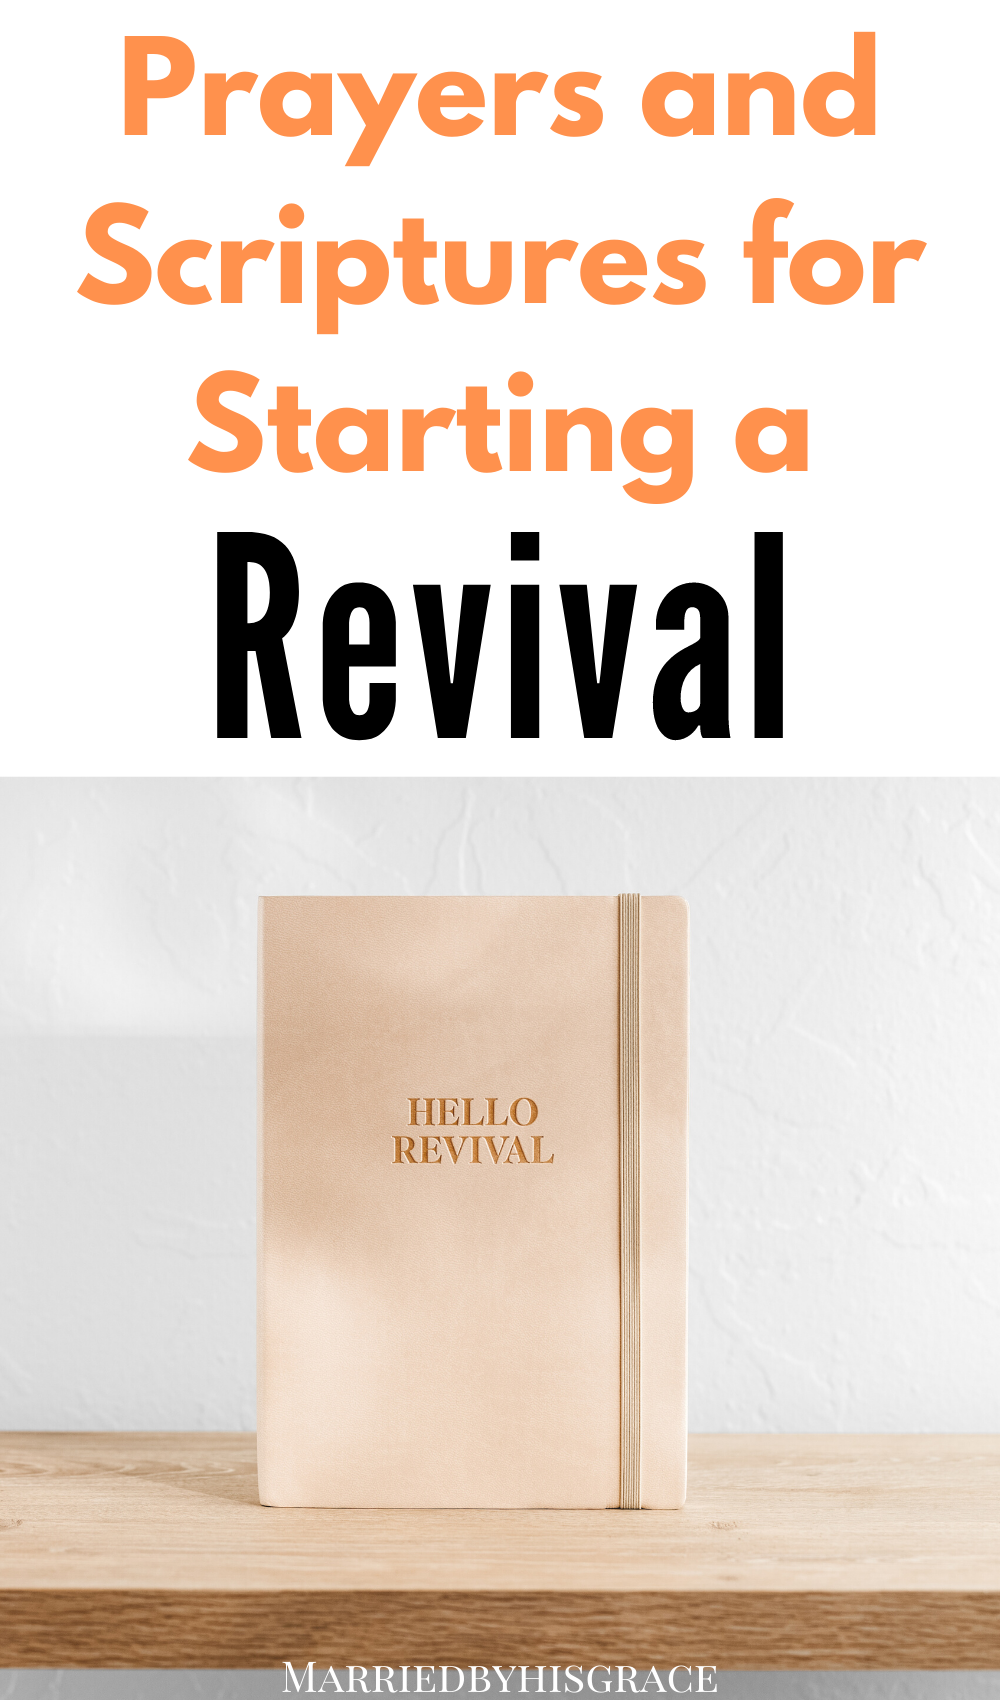 Prayers and scriptures for starting a revival.